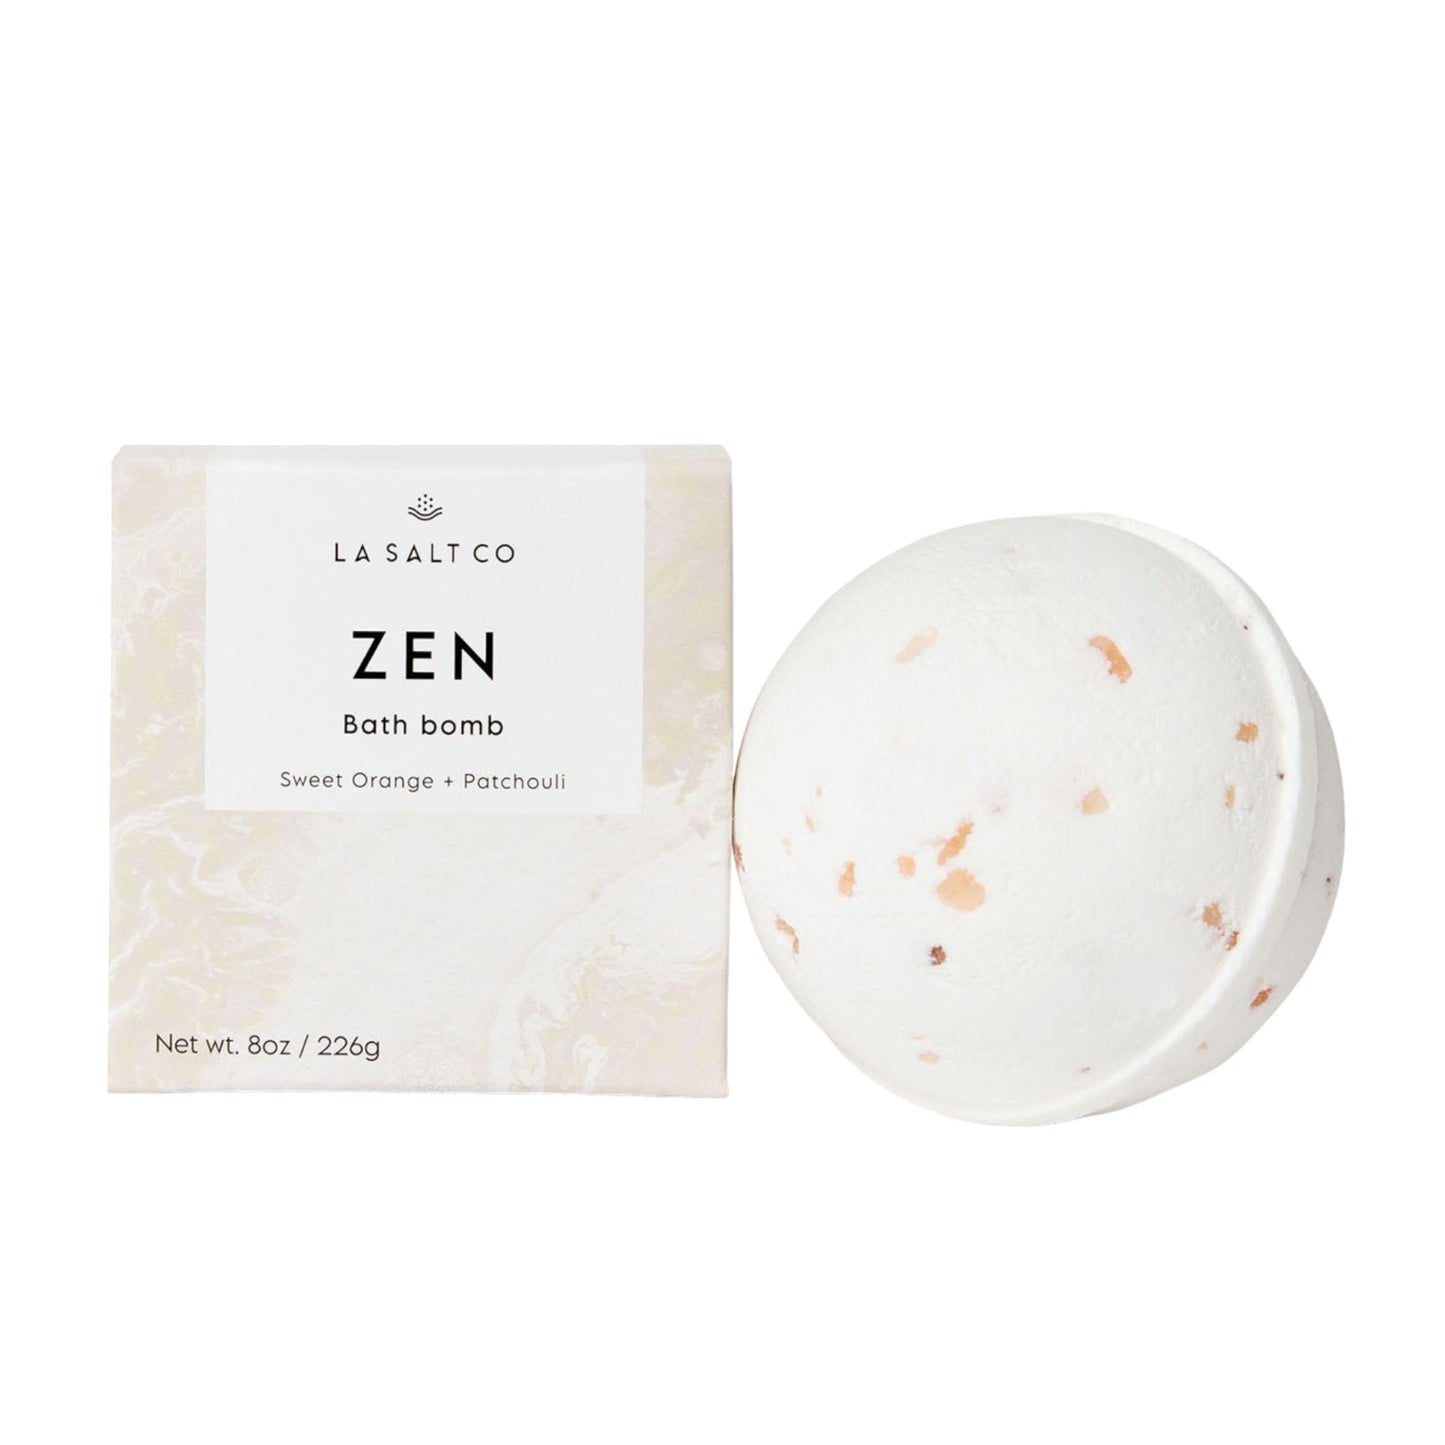 The Zen Bath Bomb next to the product box on white background